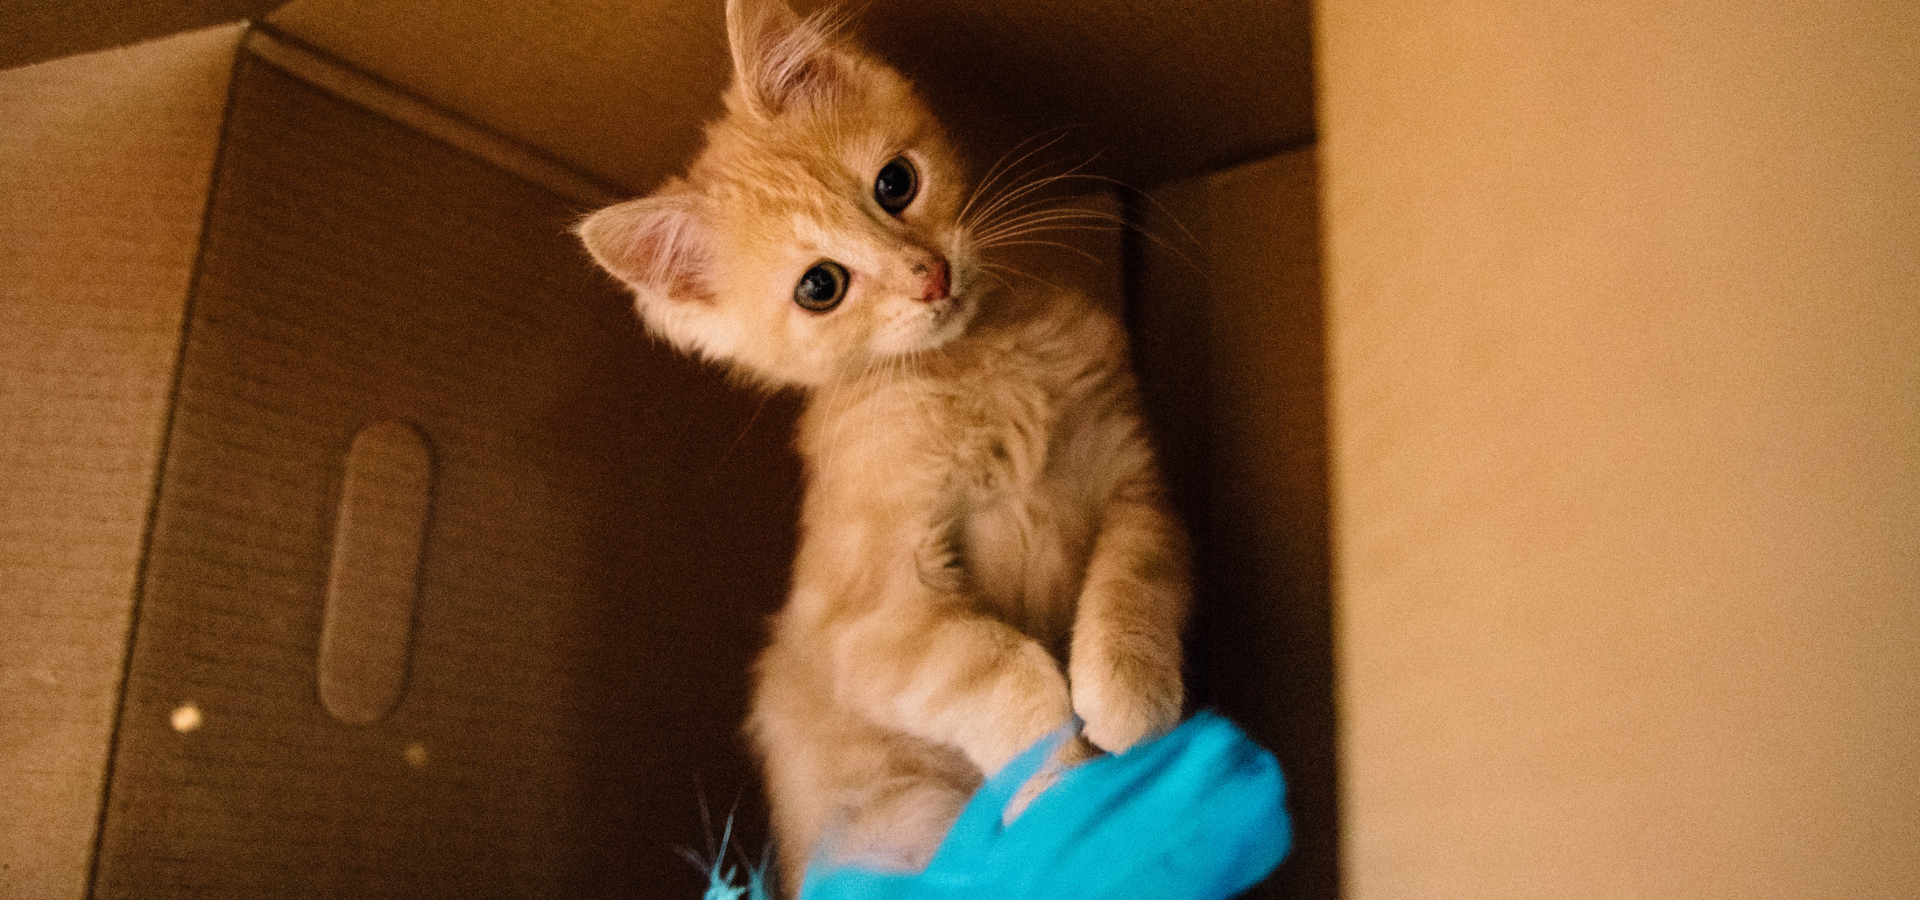 Orange kitten playing with a blue feather toy